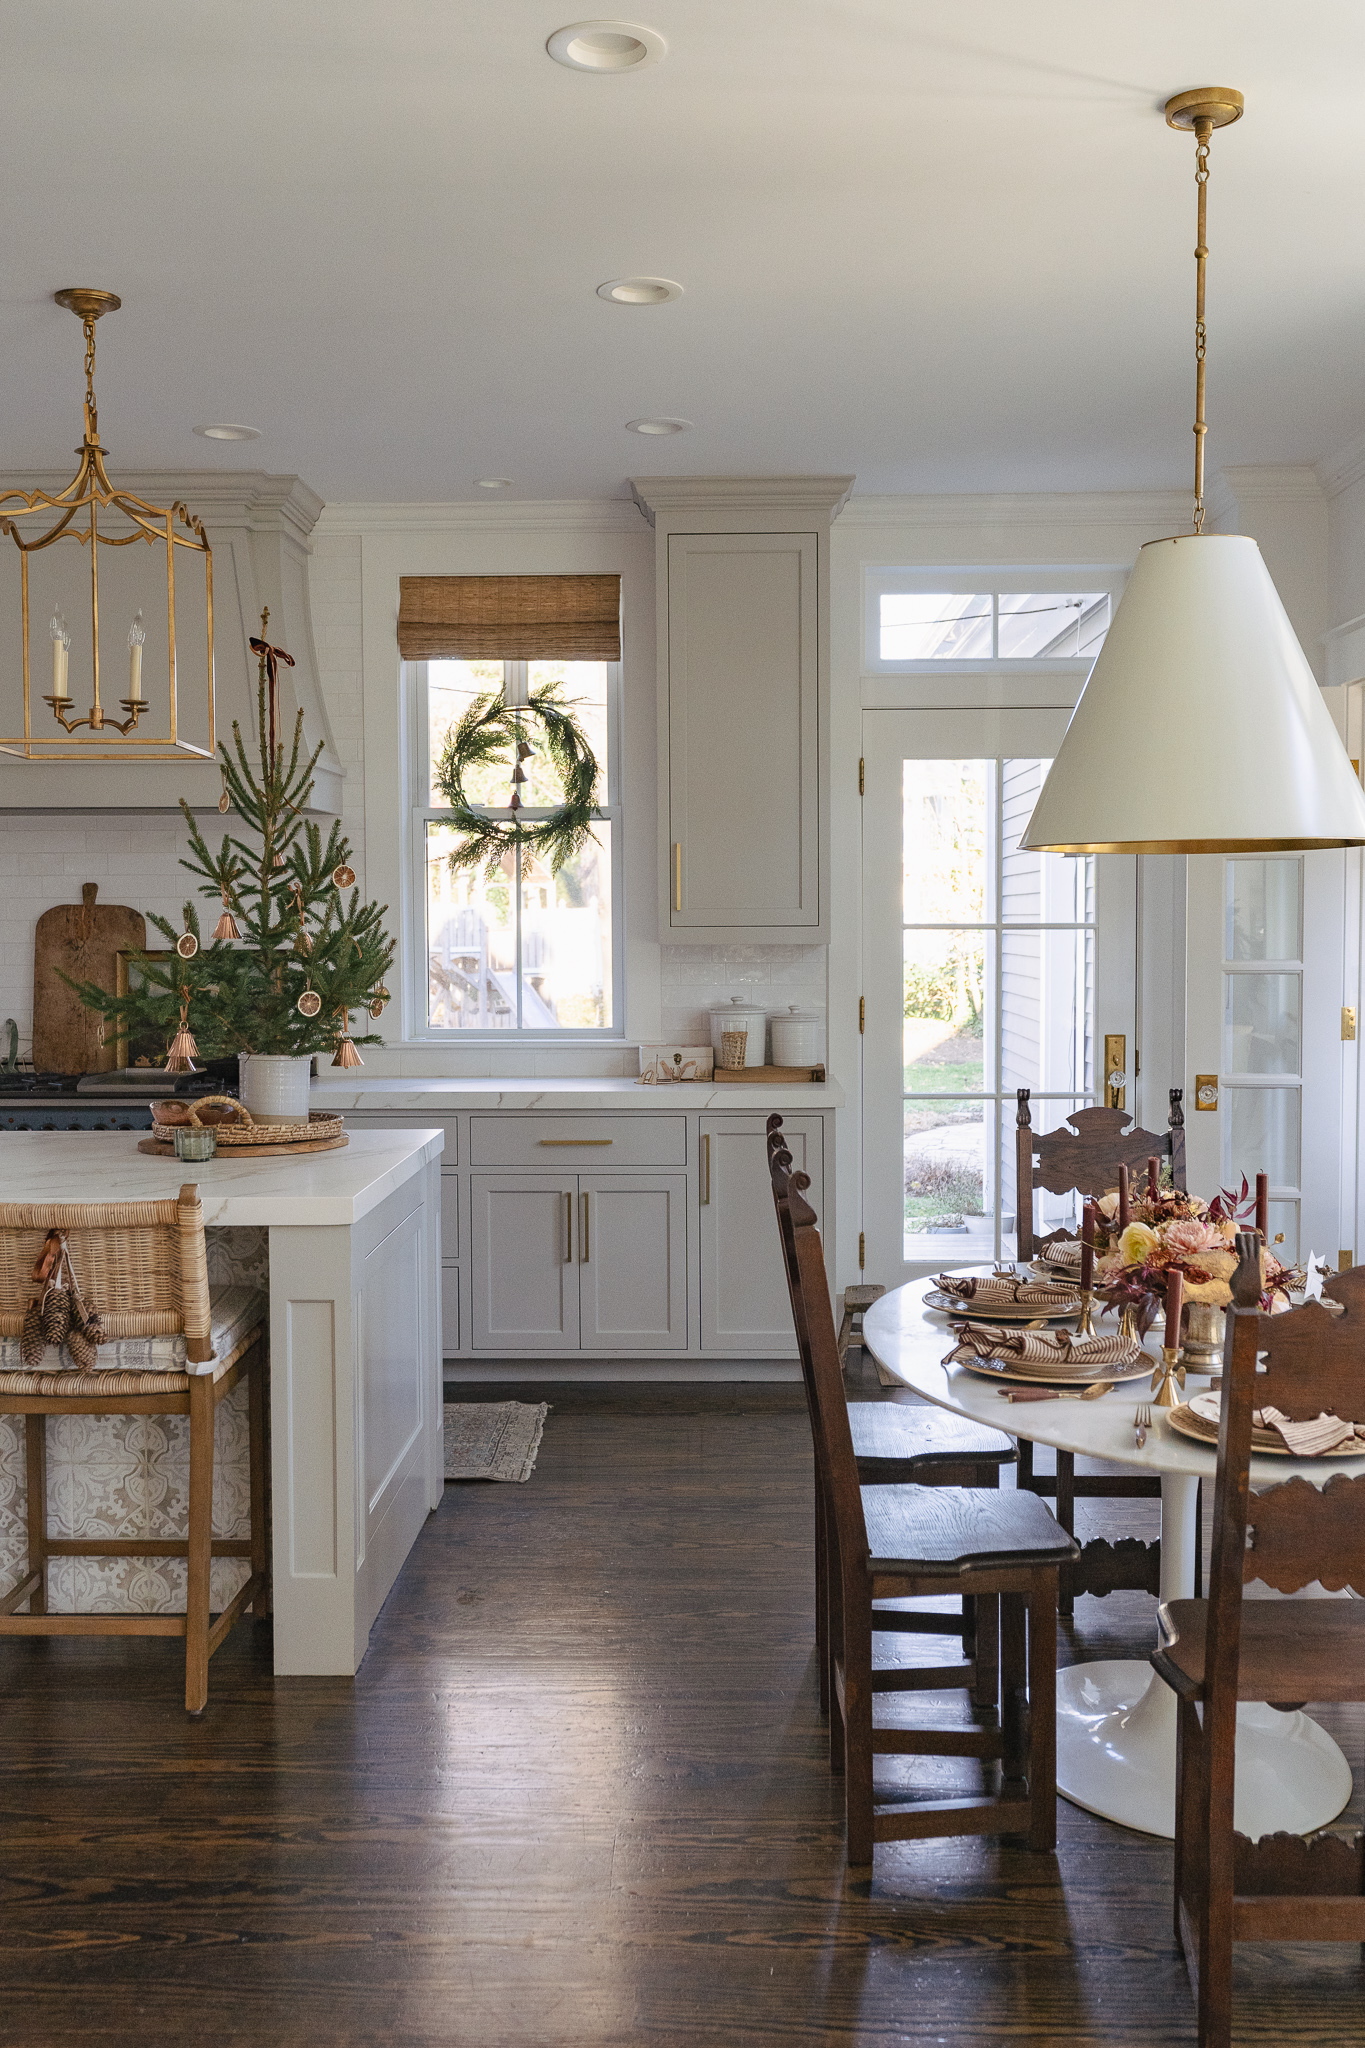 Stunning white kitchen with antique wood chairs and tabletop Christmas tree 